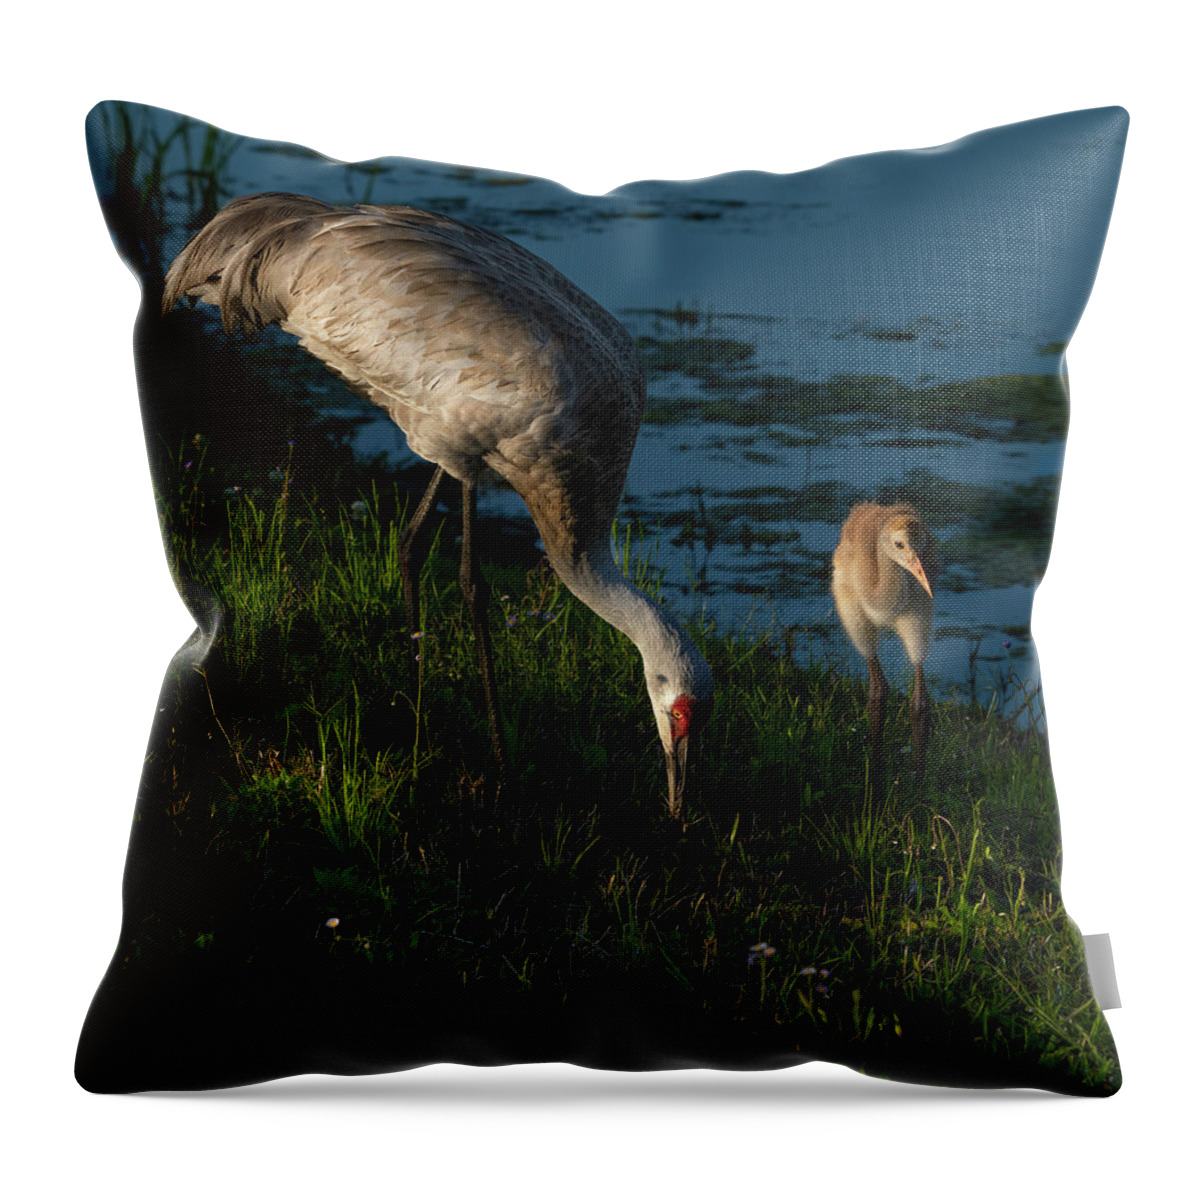 Birds Throw Pillow featuring the photograph Sandhill Crane by Larry Marshall